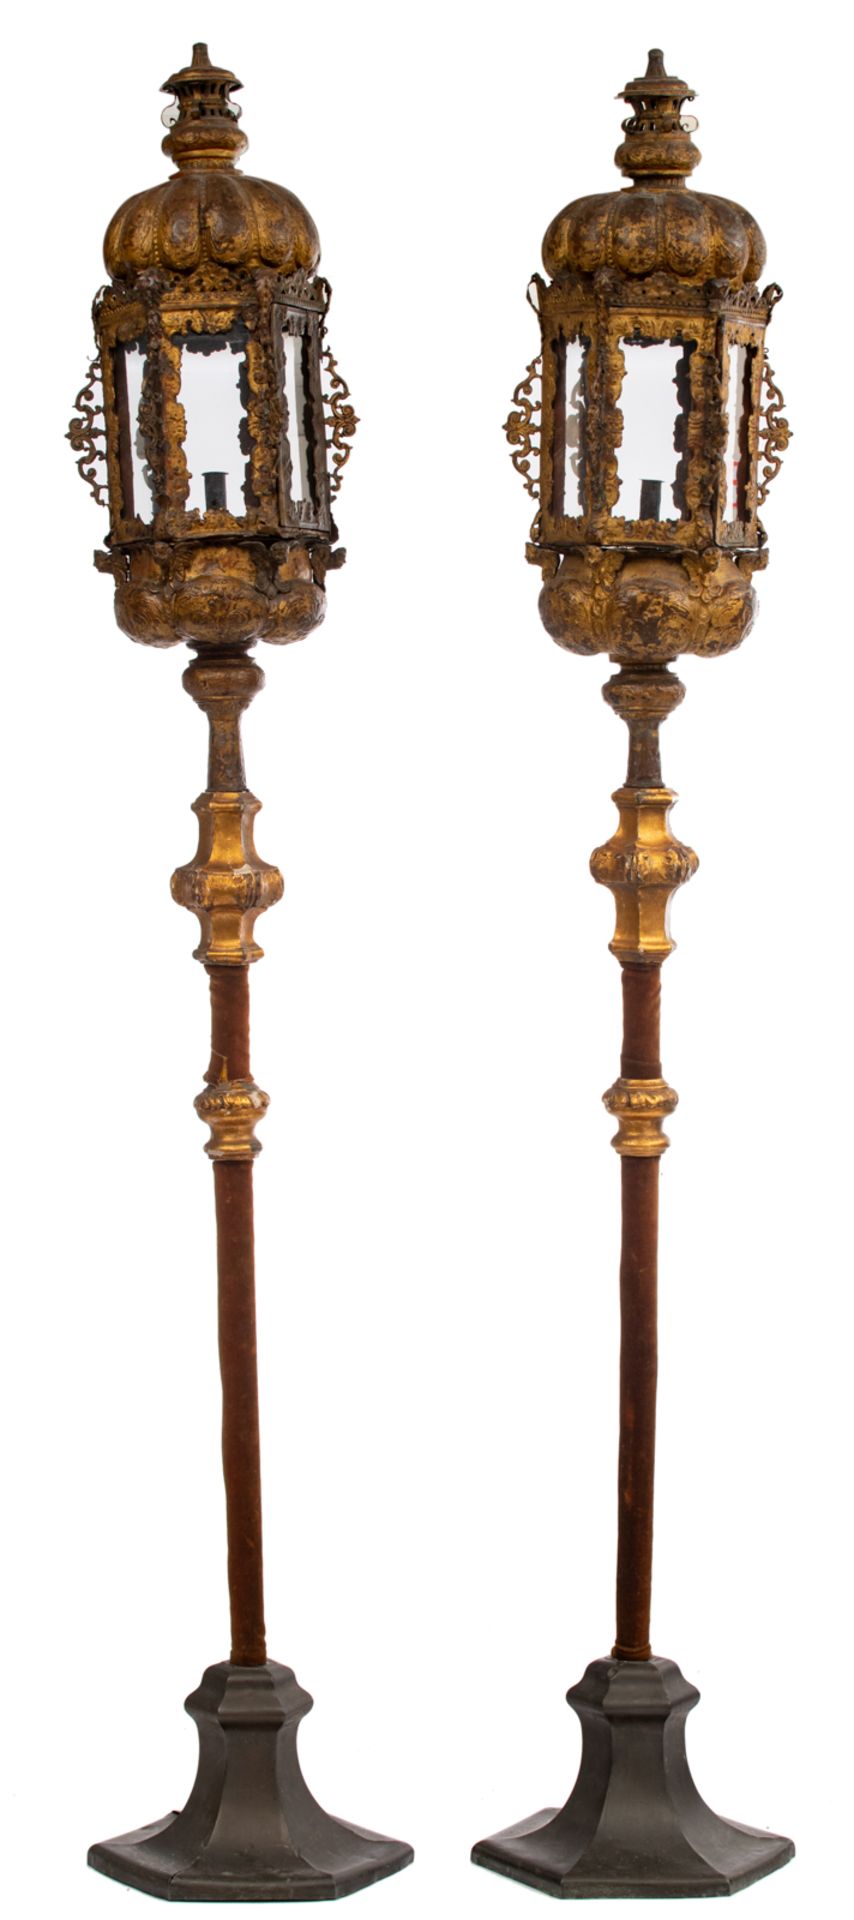 An imposing pair of Italian Baroque gilt bronze lanterns, decorated with angel heads, on two matchin - Image 3 of 4